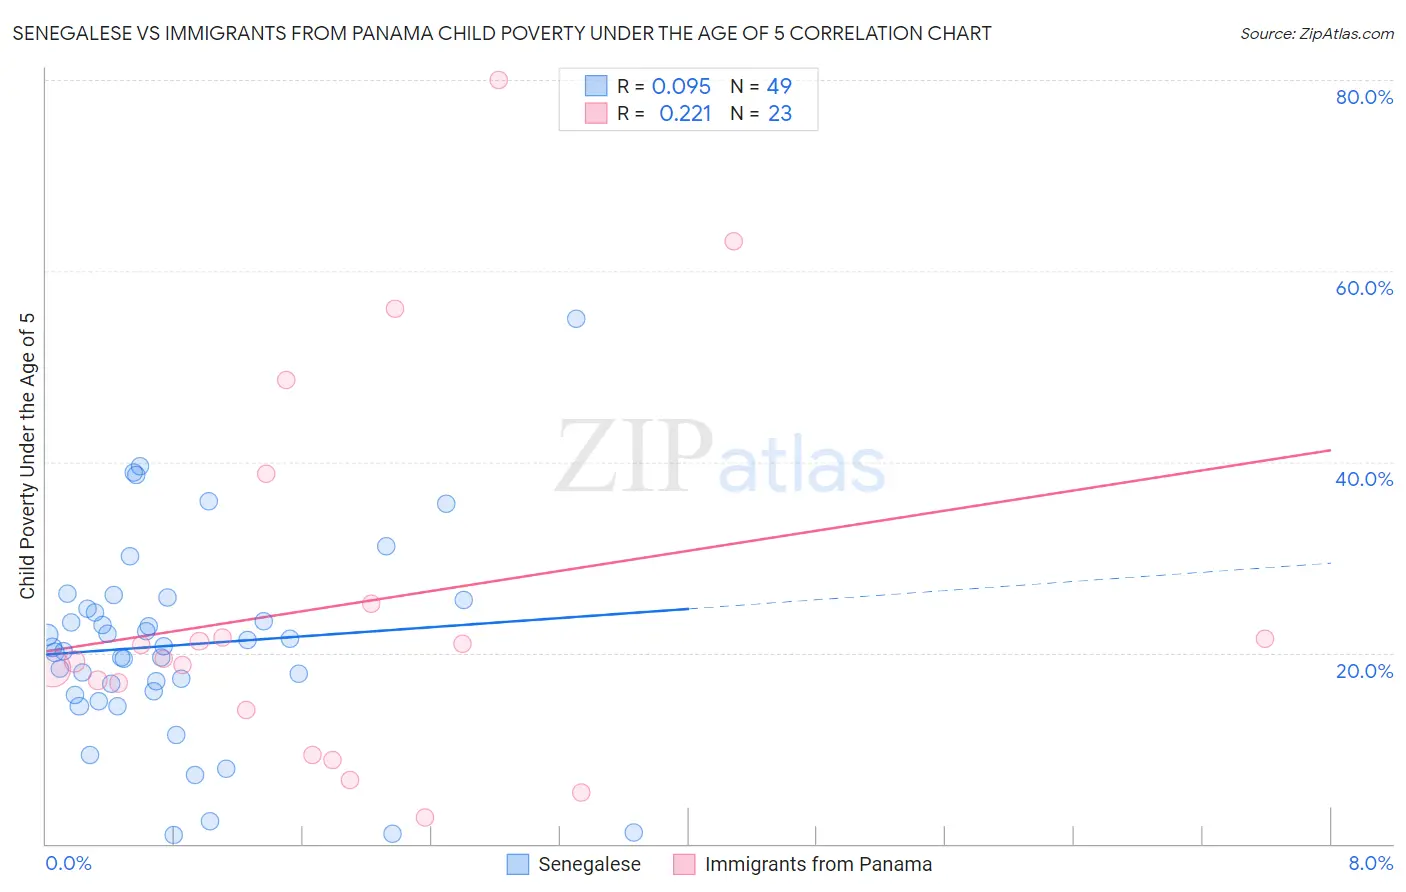 Senegalese vs Immigrants from Panama Child Poverty Under the Age of 5